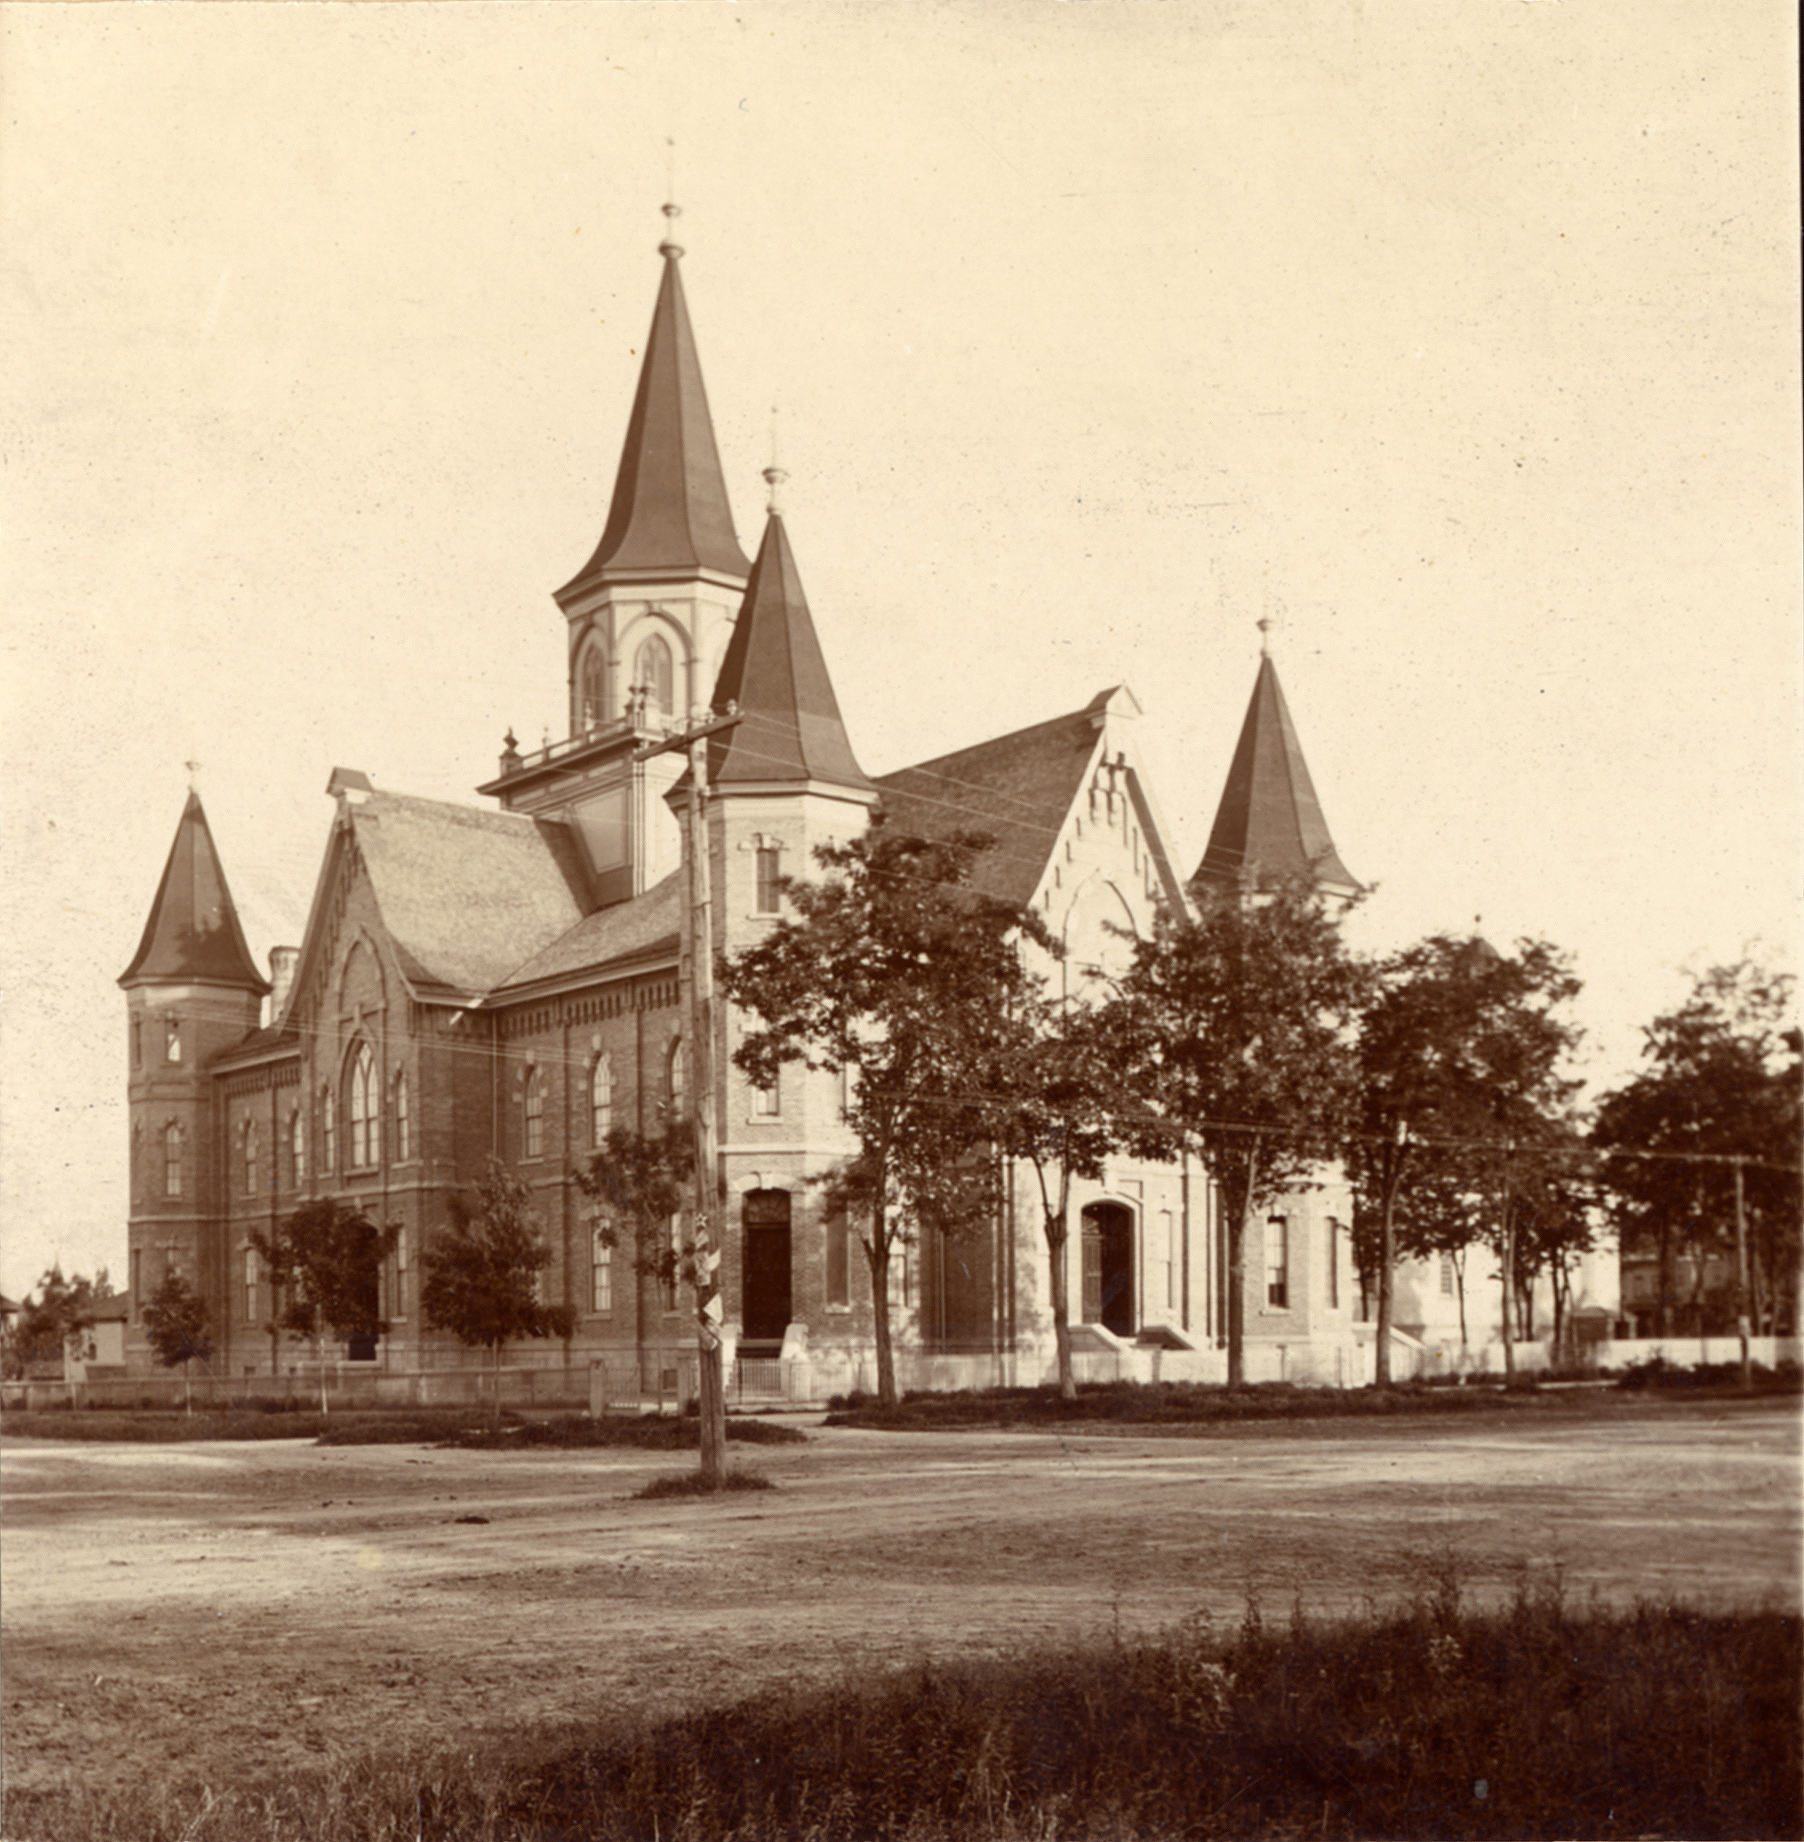 An old, black-and-white photograph of the Provo Tabernacle, a brick building with slanted roofs and five towers.